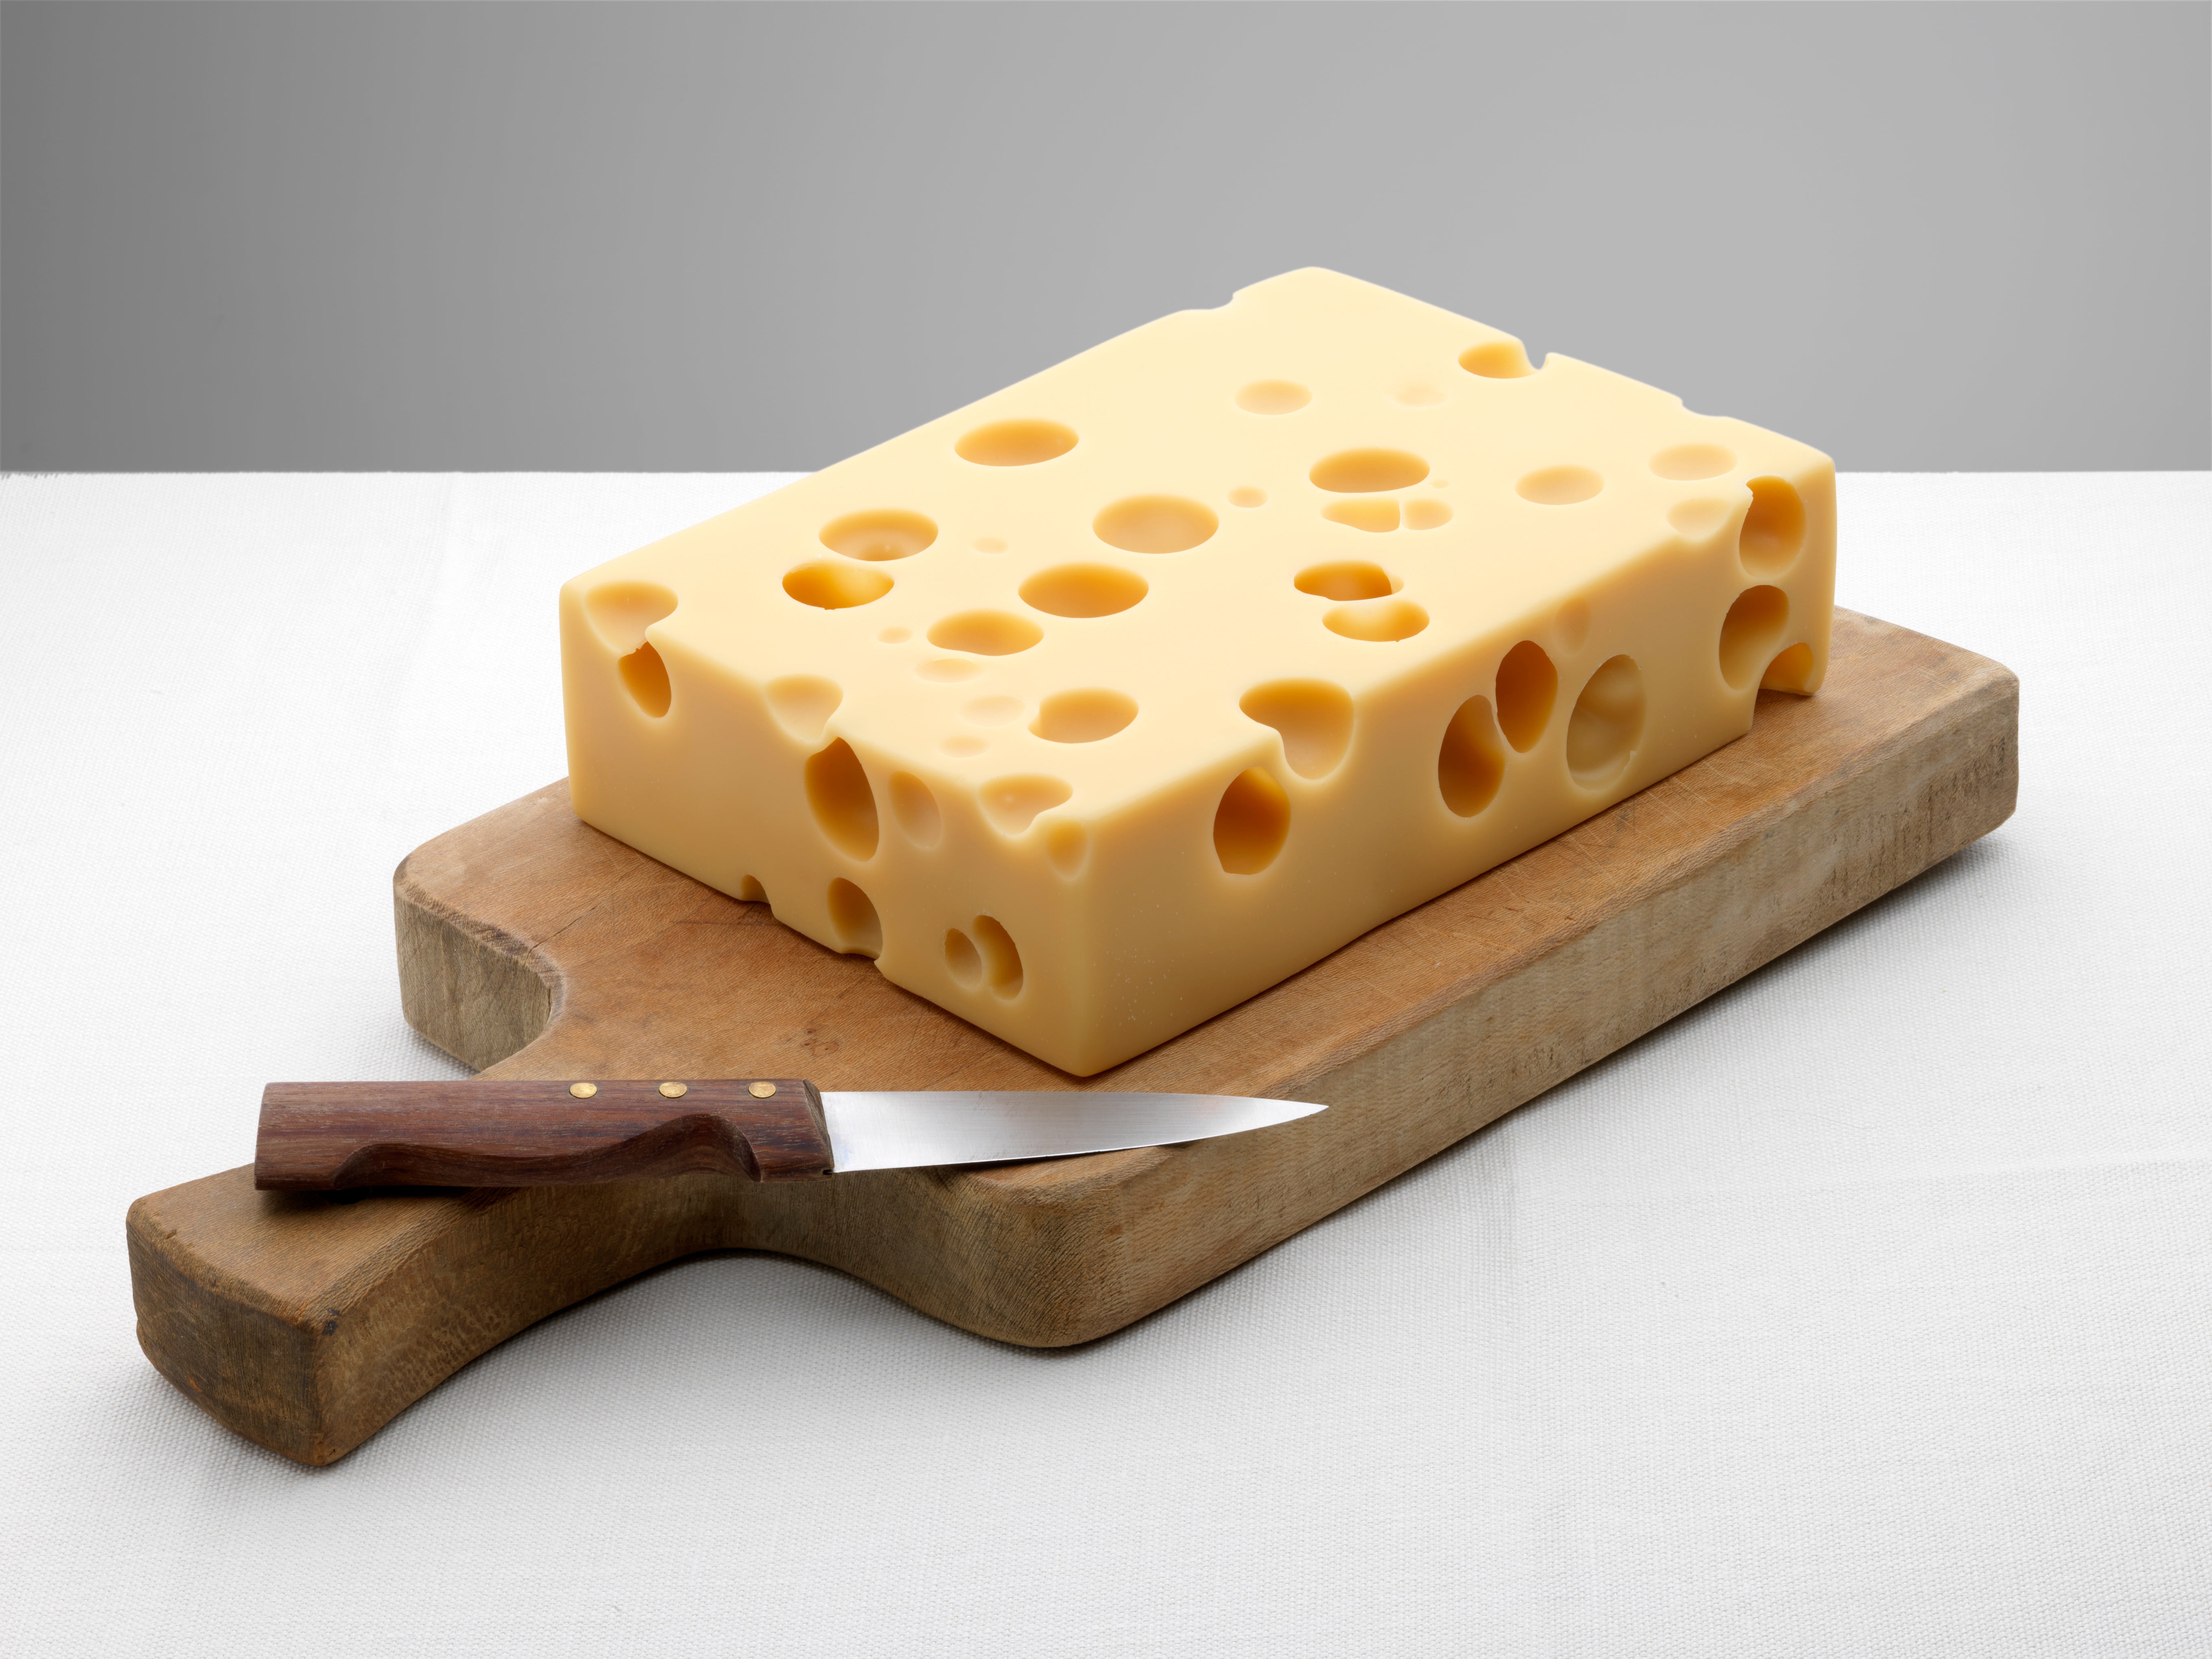 how do you make cheese with holes